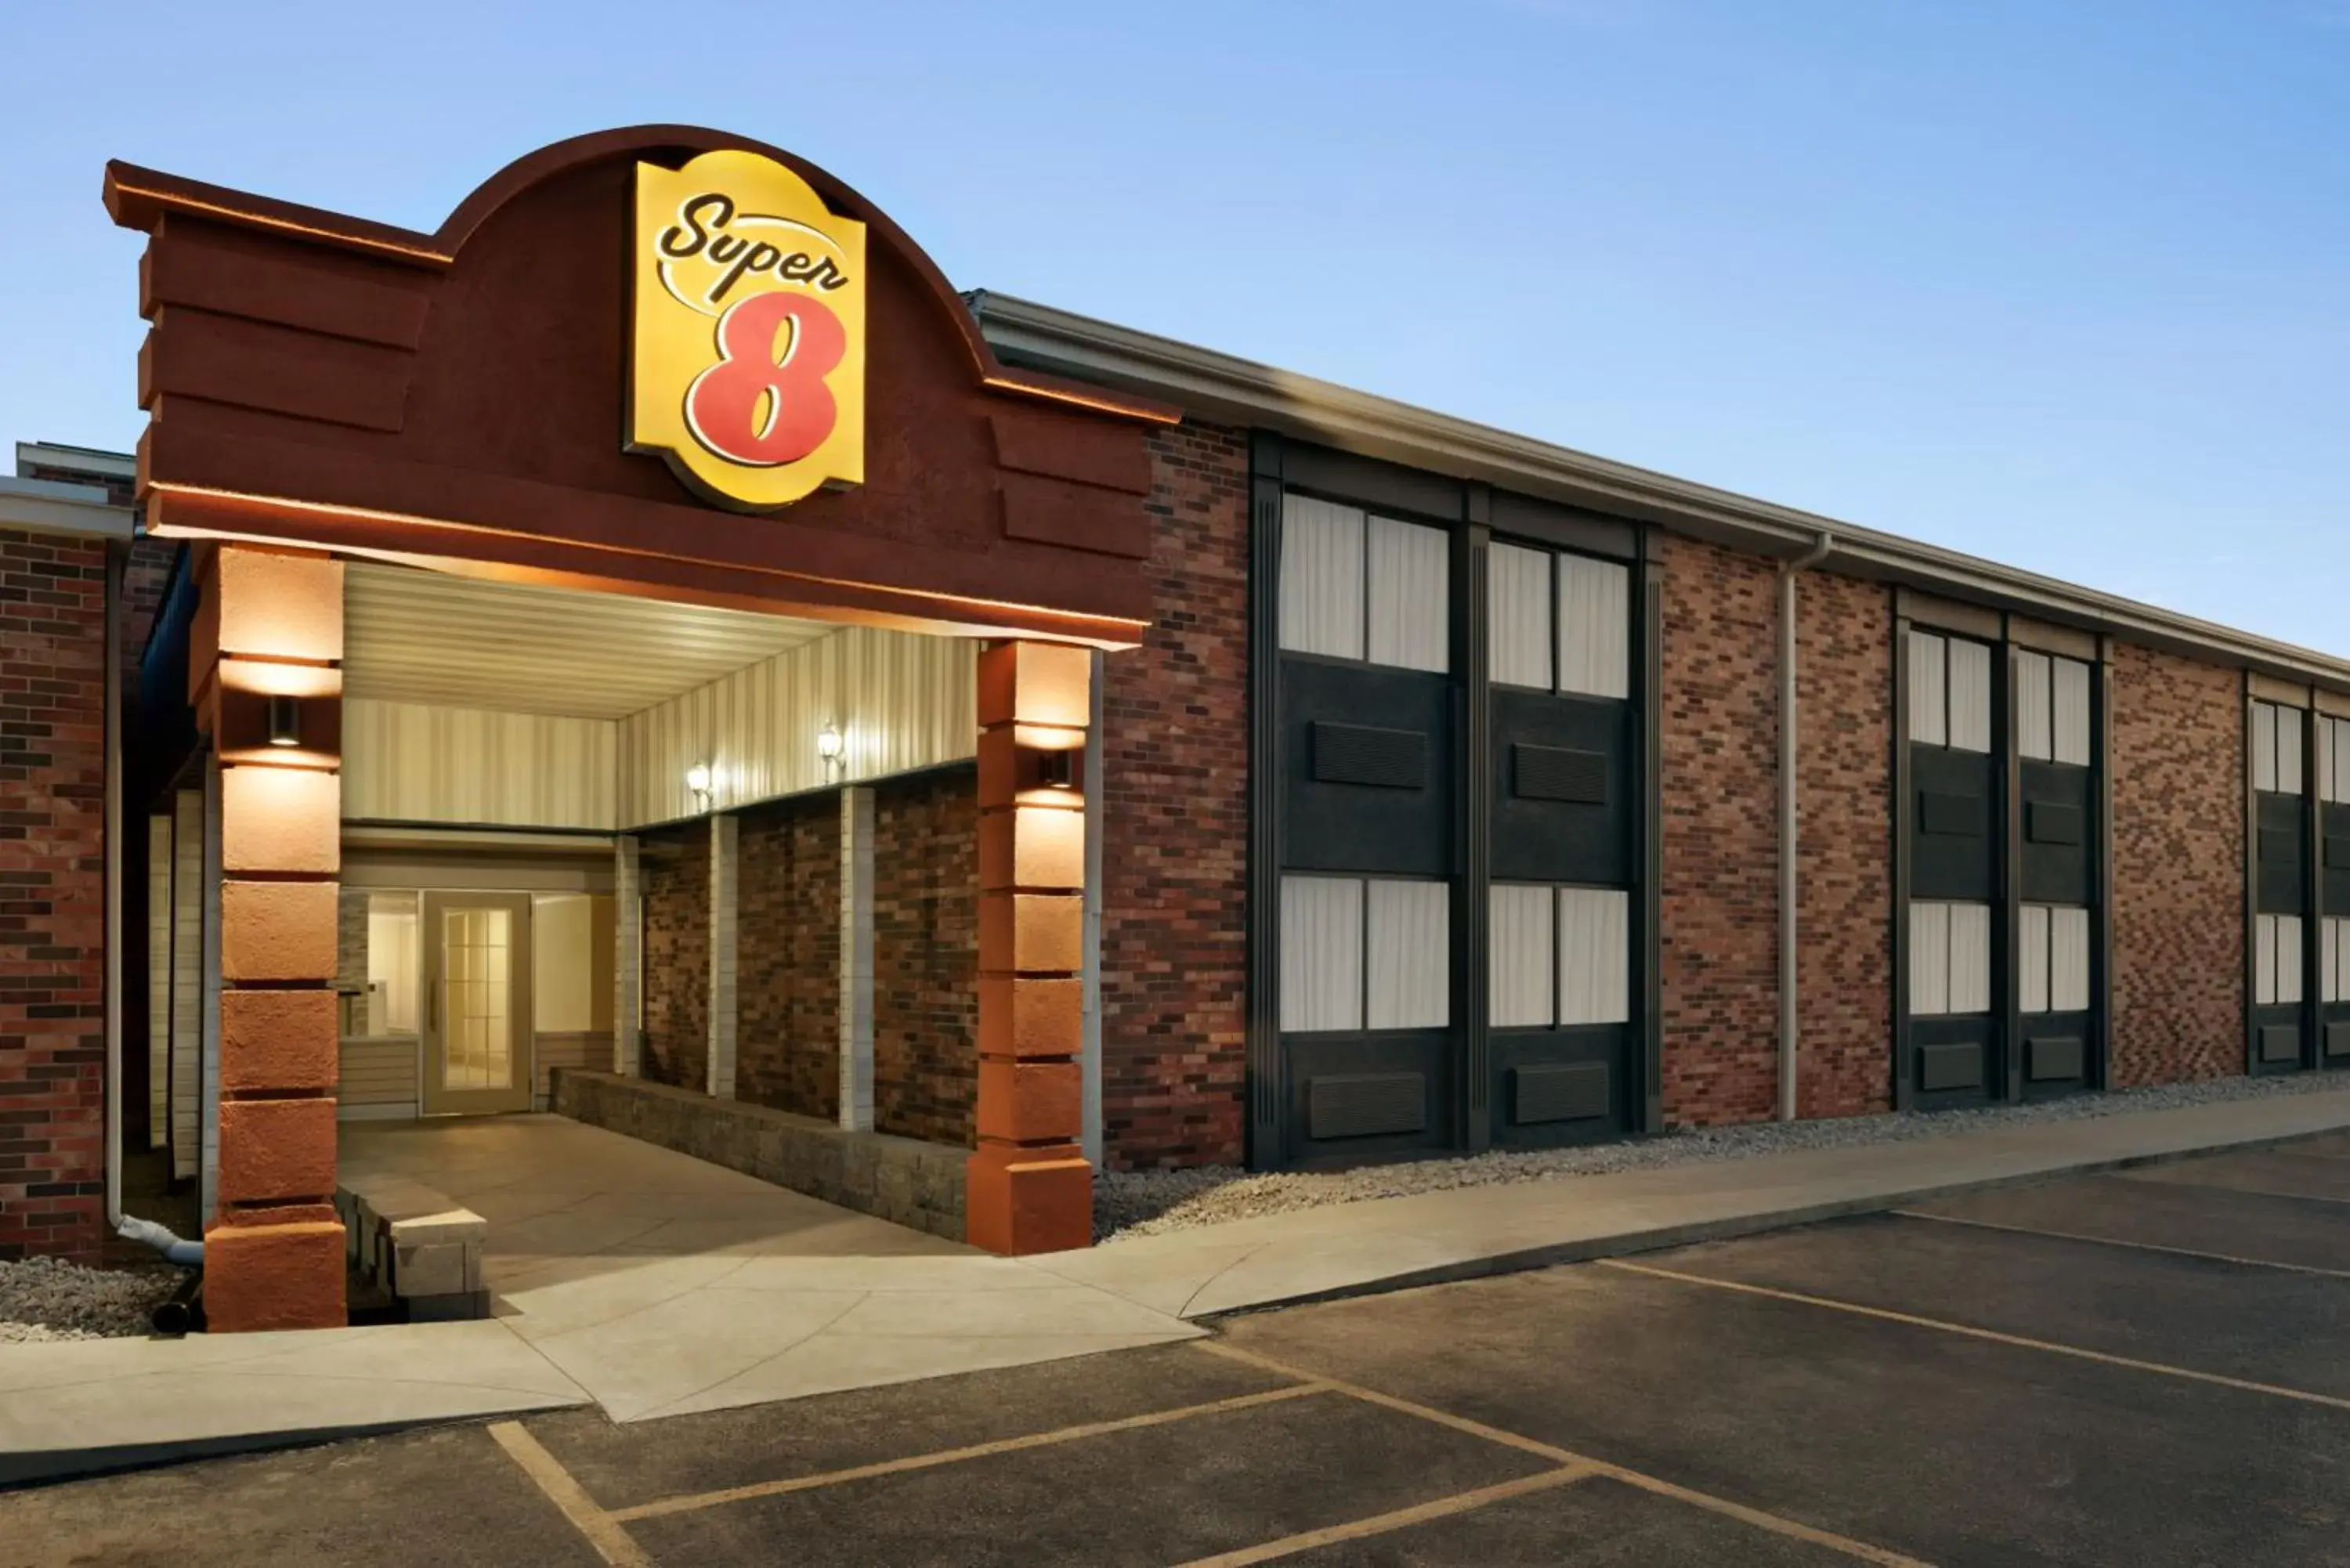 Property Building in Super 8 by Wyndham Des Moines